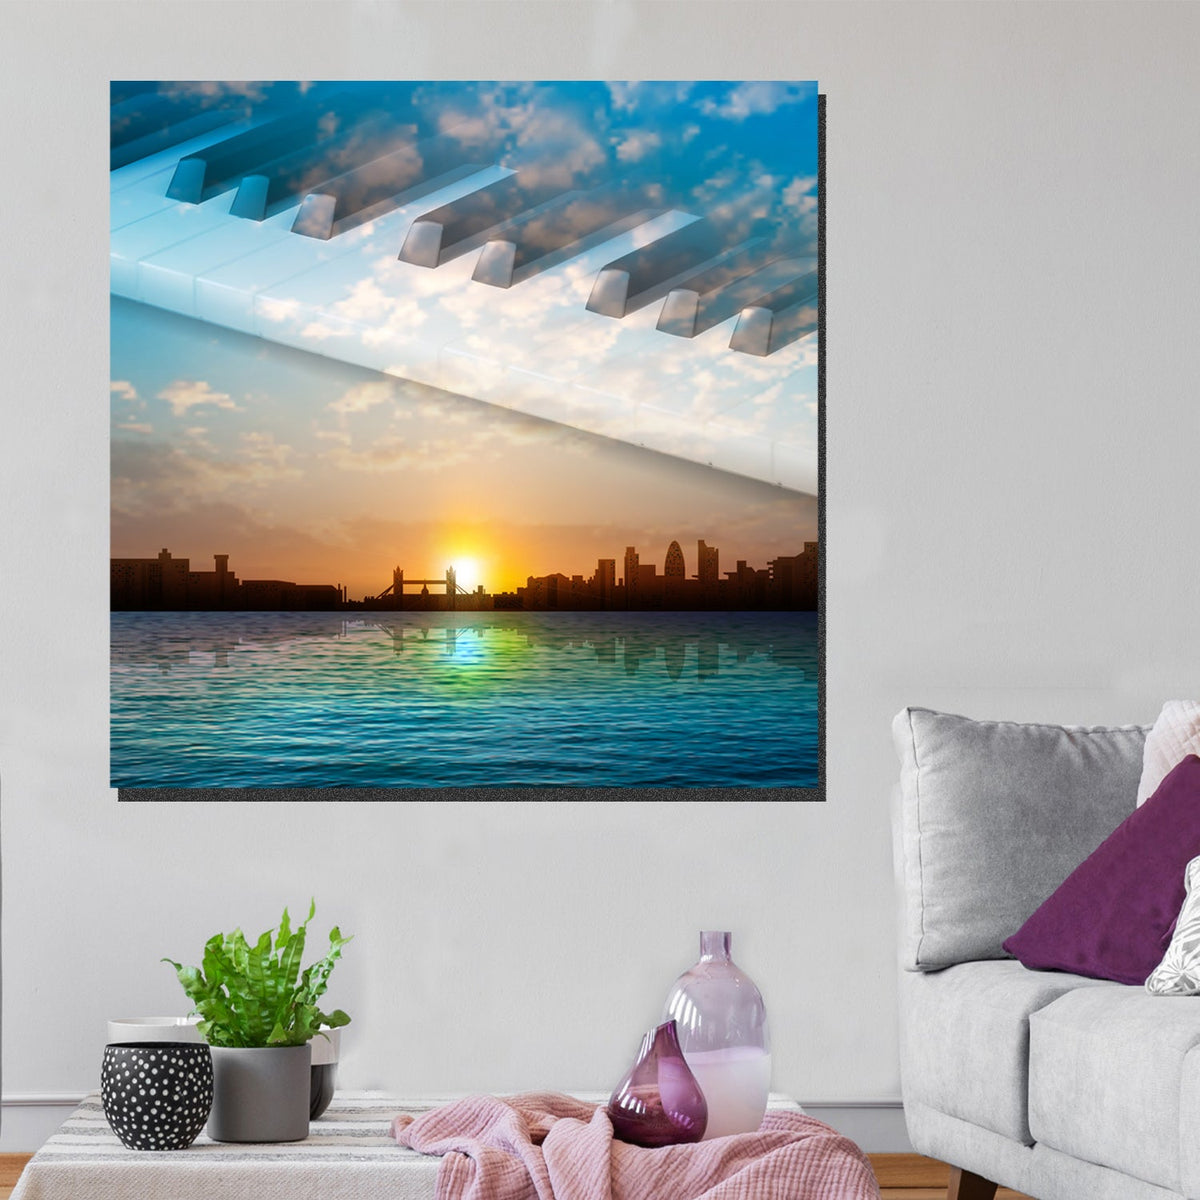 https://cdn.shopify.com/s/files/1/0387/9986/8044/products/LondonSkylinePianoCanvasArtprintStretched-4.jpg